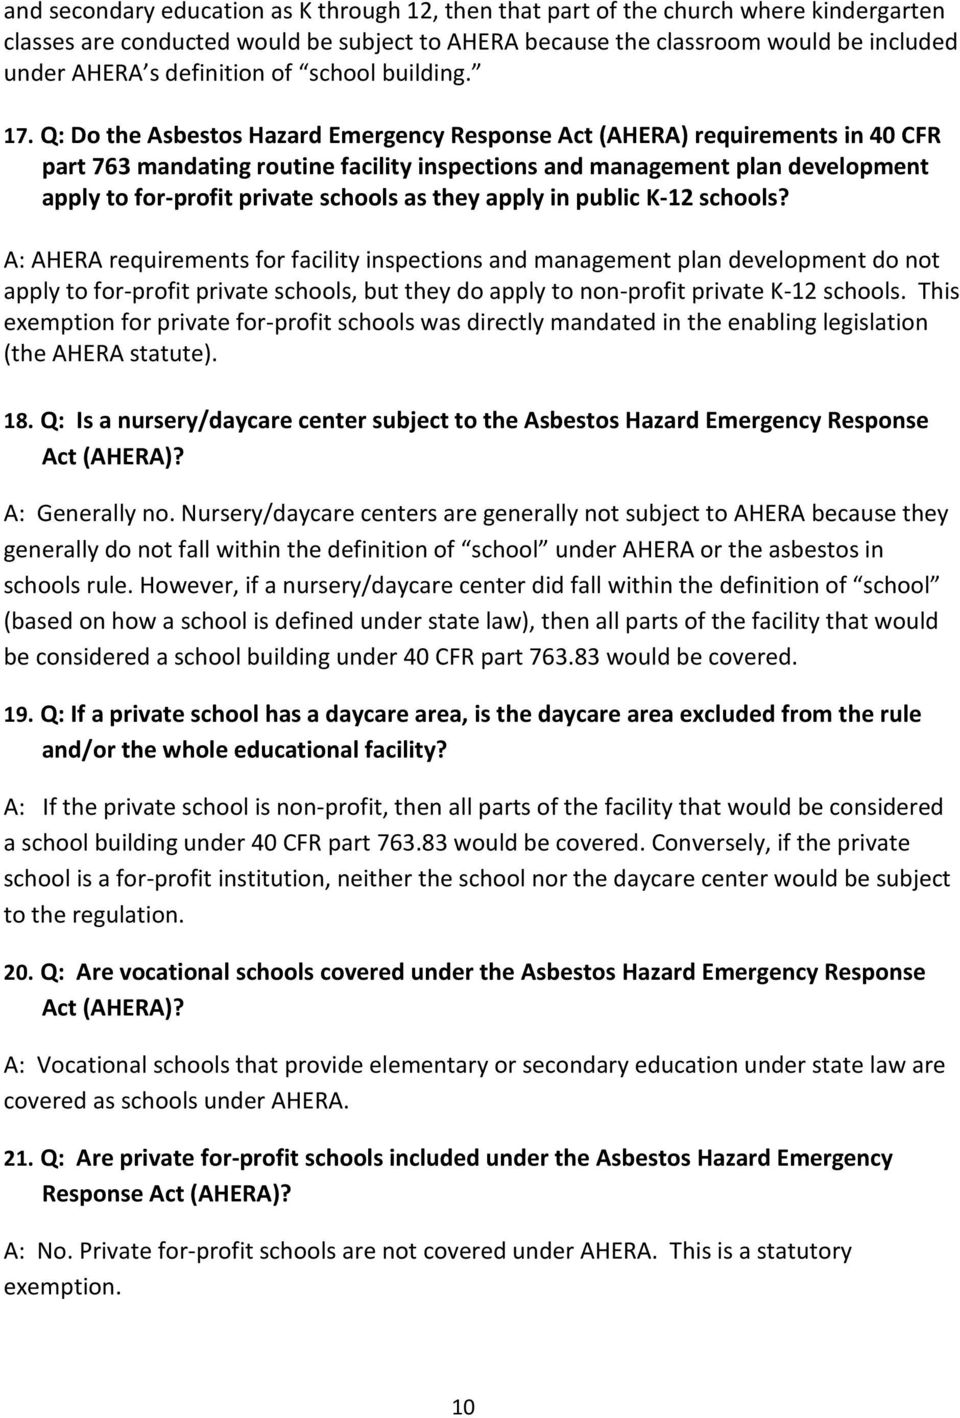 Q: Do the Asbestos Hazard Emergency Response Act (AHERA) requirements in 40 CFR part 763 mandating routine facility inspections and management plan development apply to for-profit private schools as